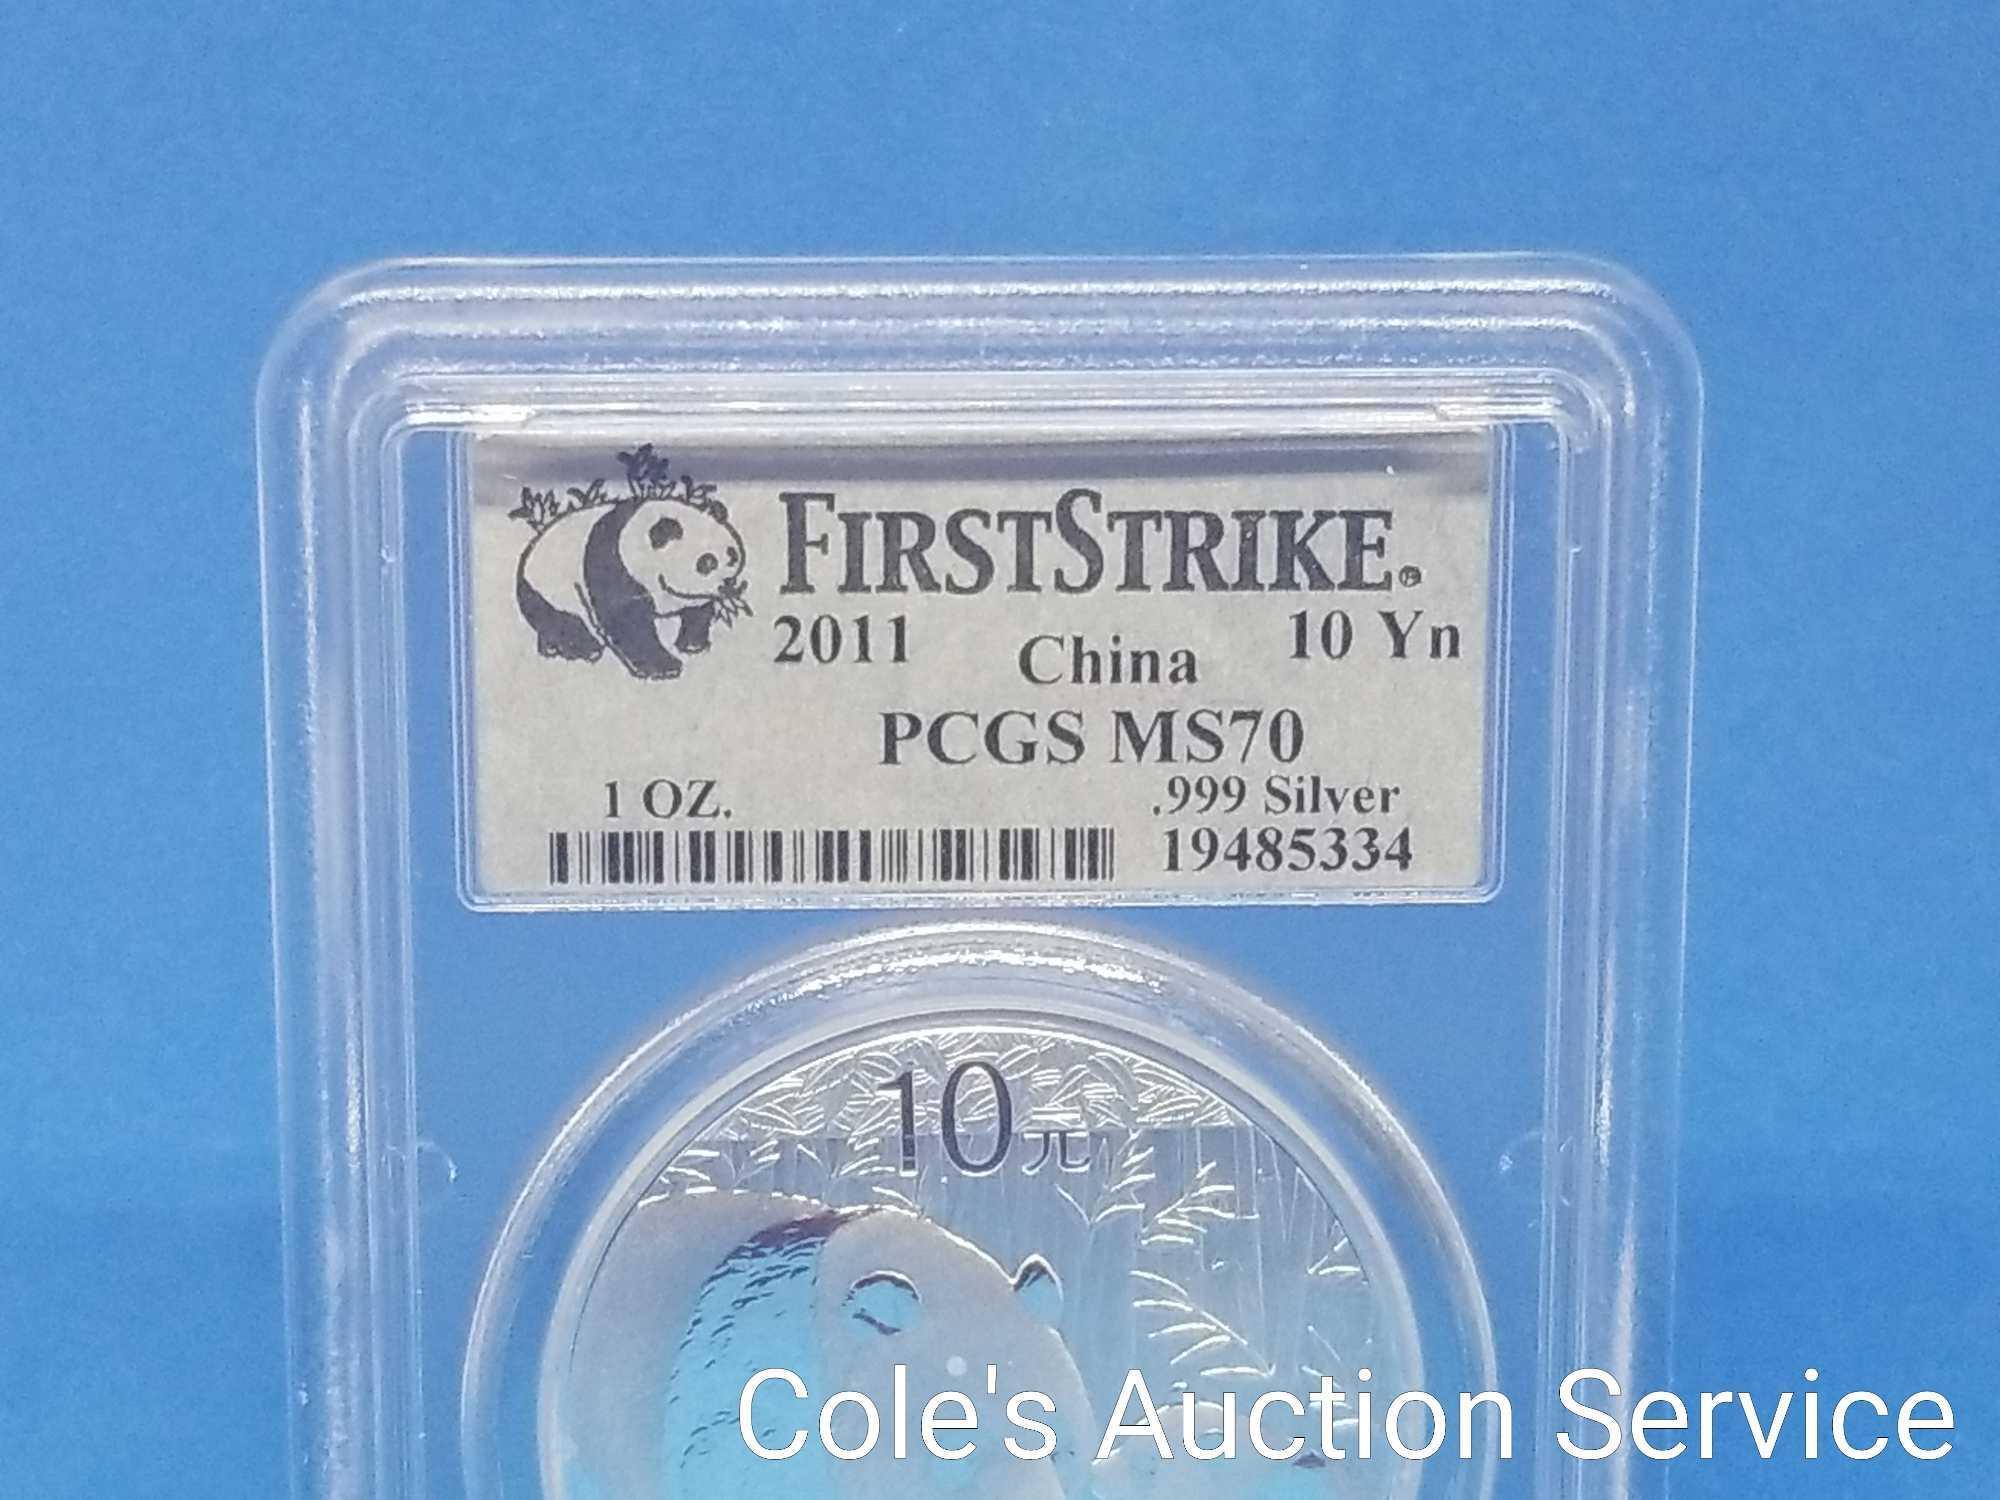 Beautiful 2011 Chinese first strike 1 oz silver coin. Perfect grading of MS70 by PCGS.